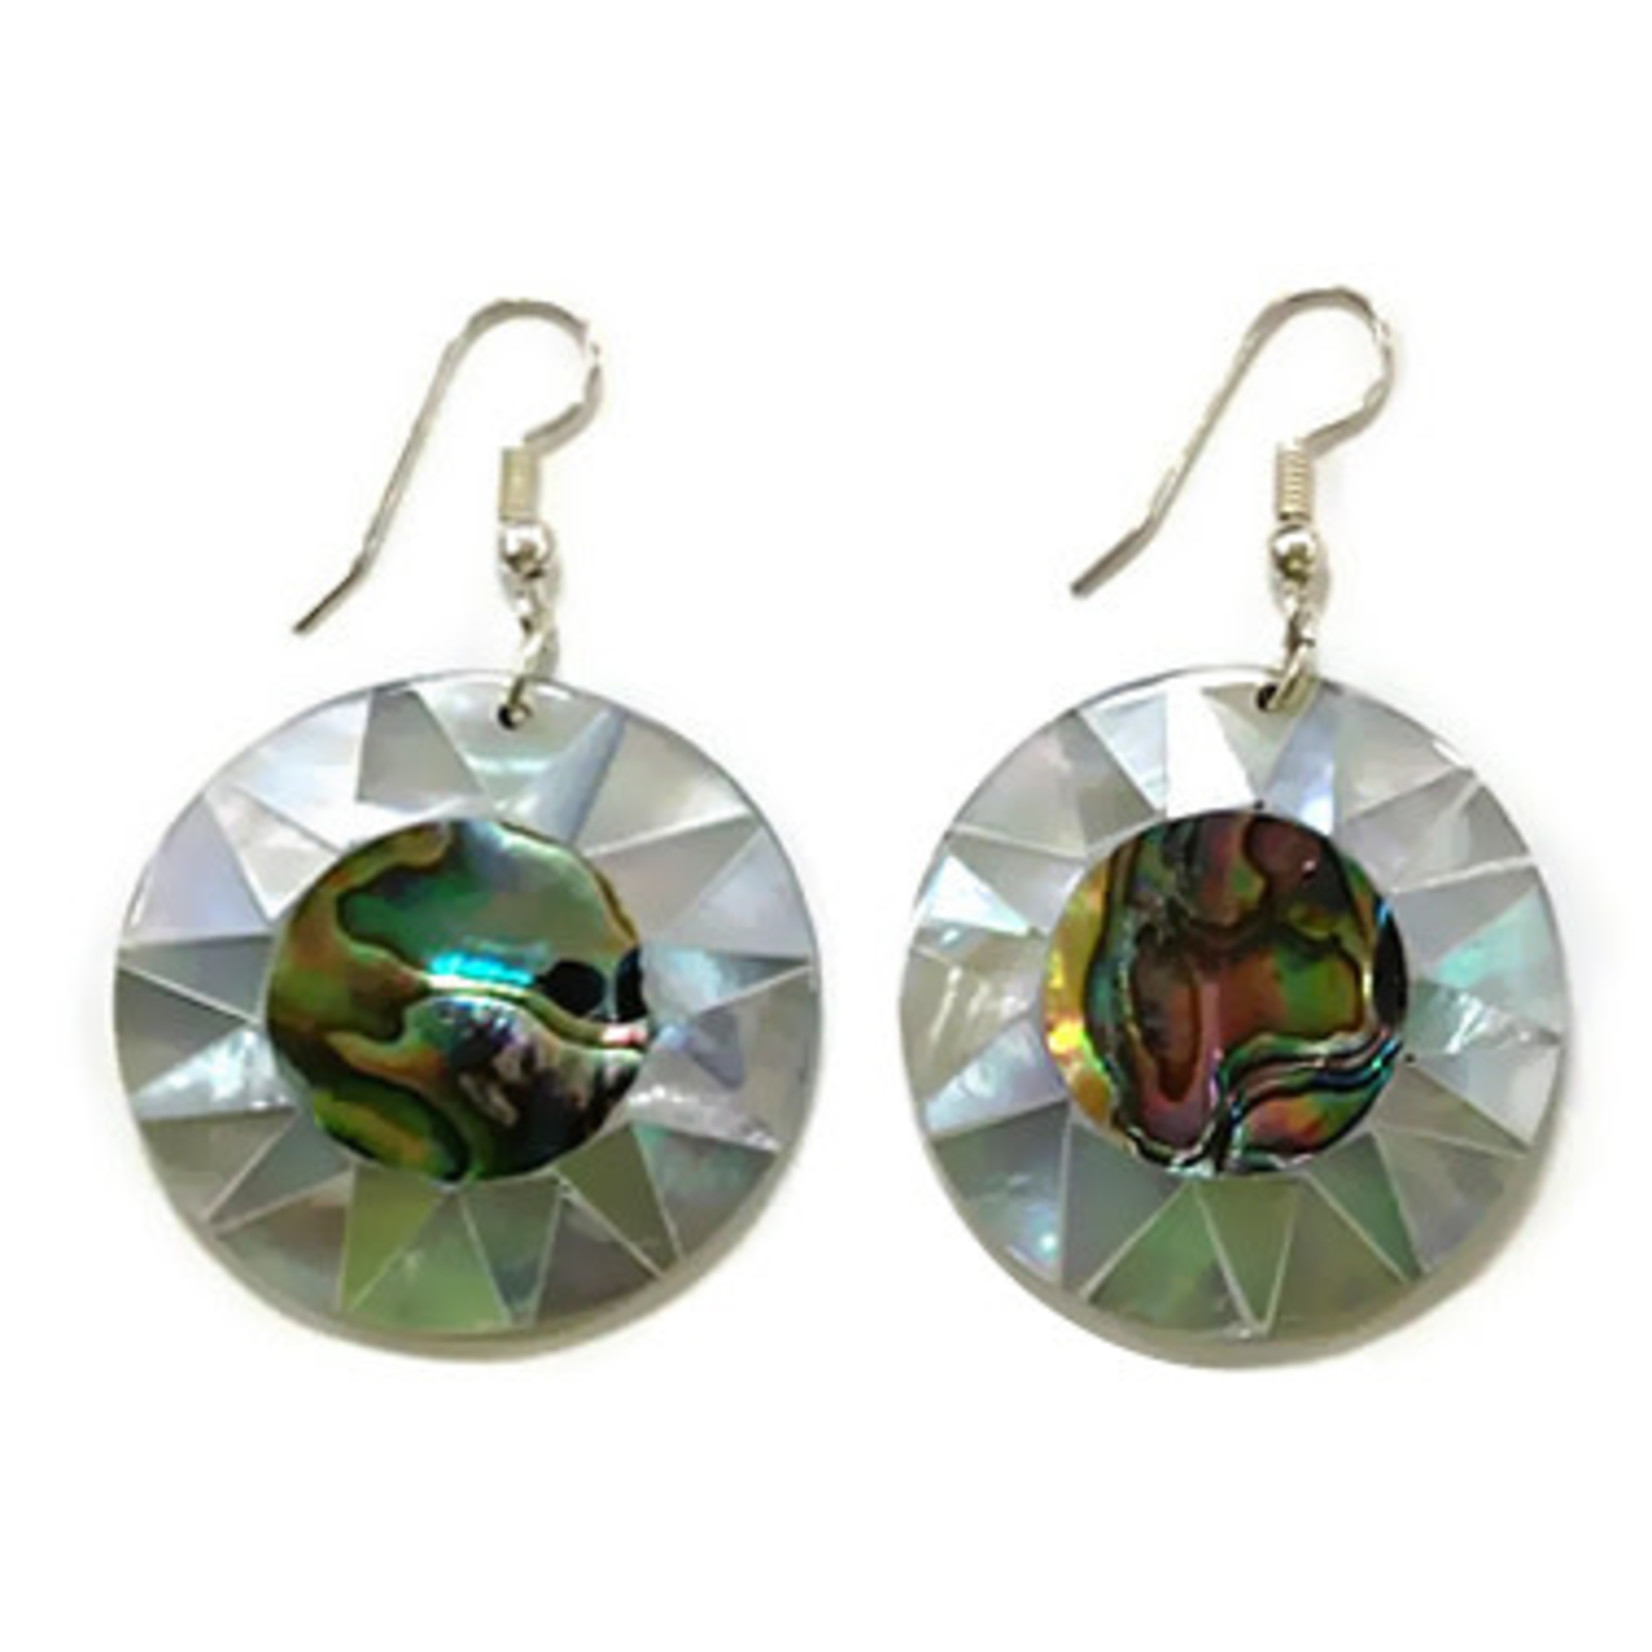 EA109 Shell Earrings Paua & Mother of Pearl Round Starburst